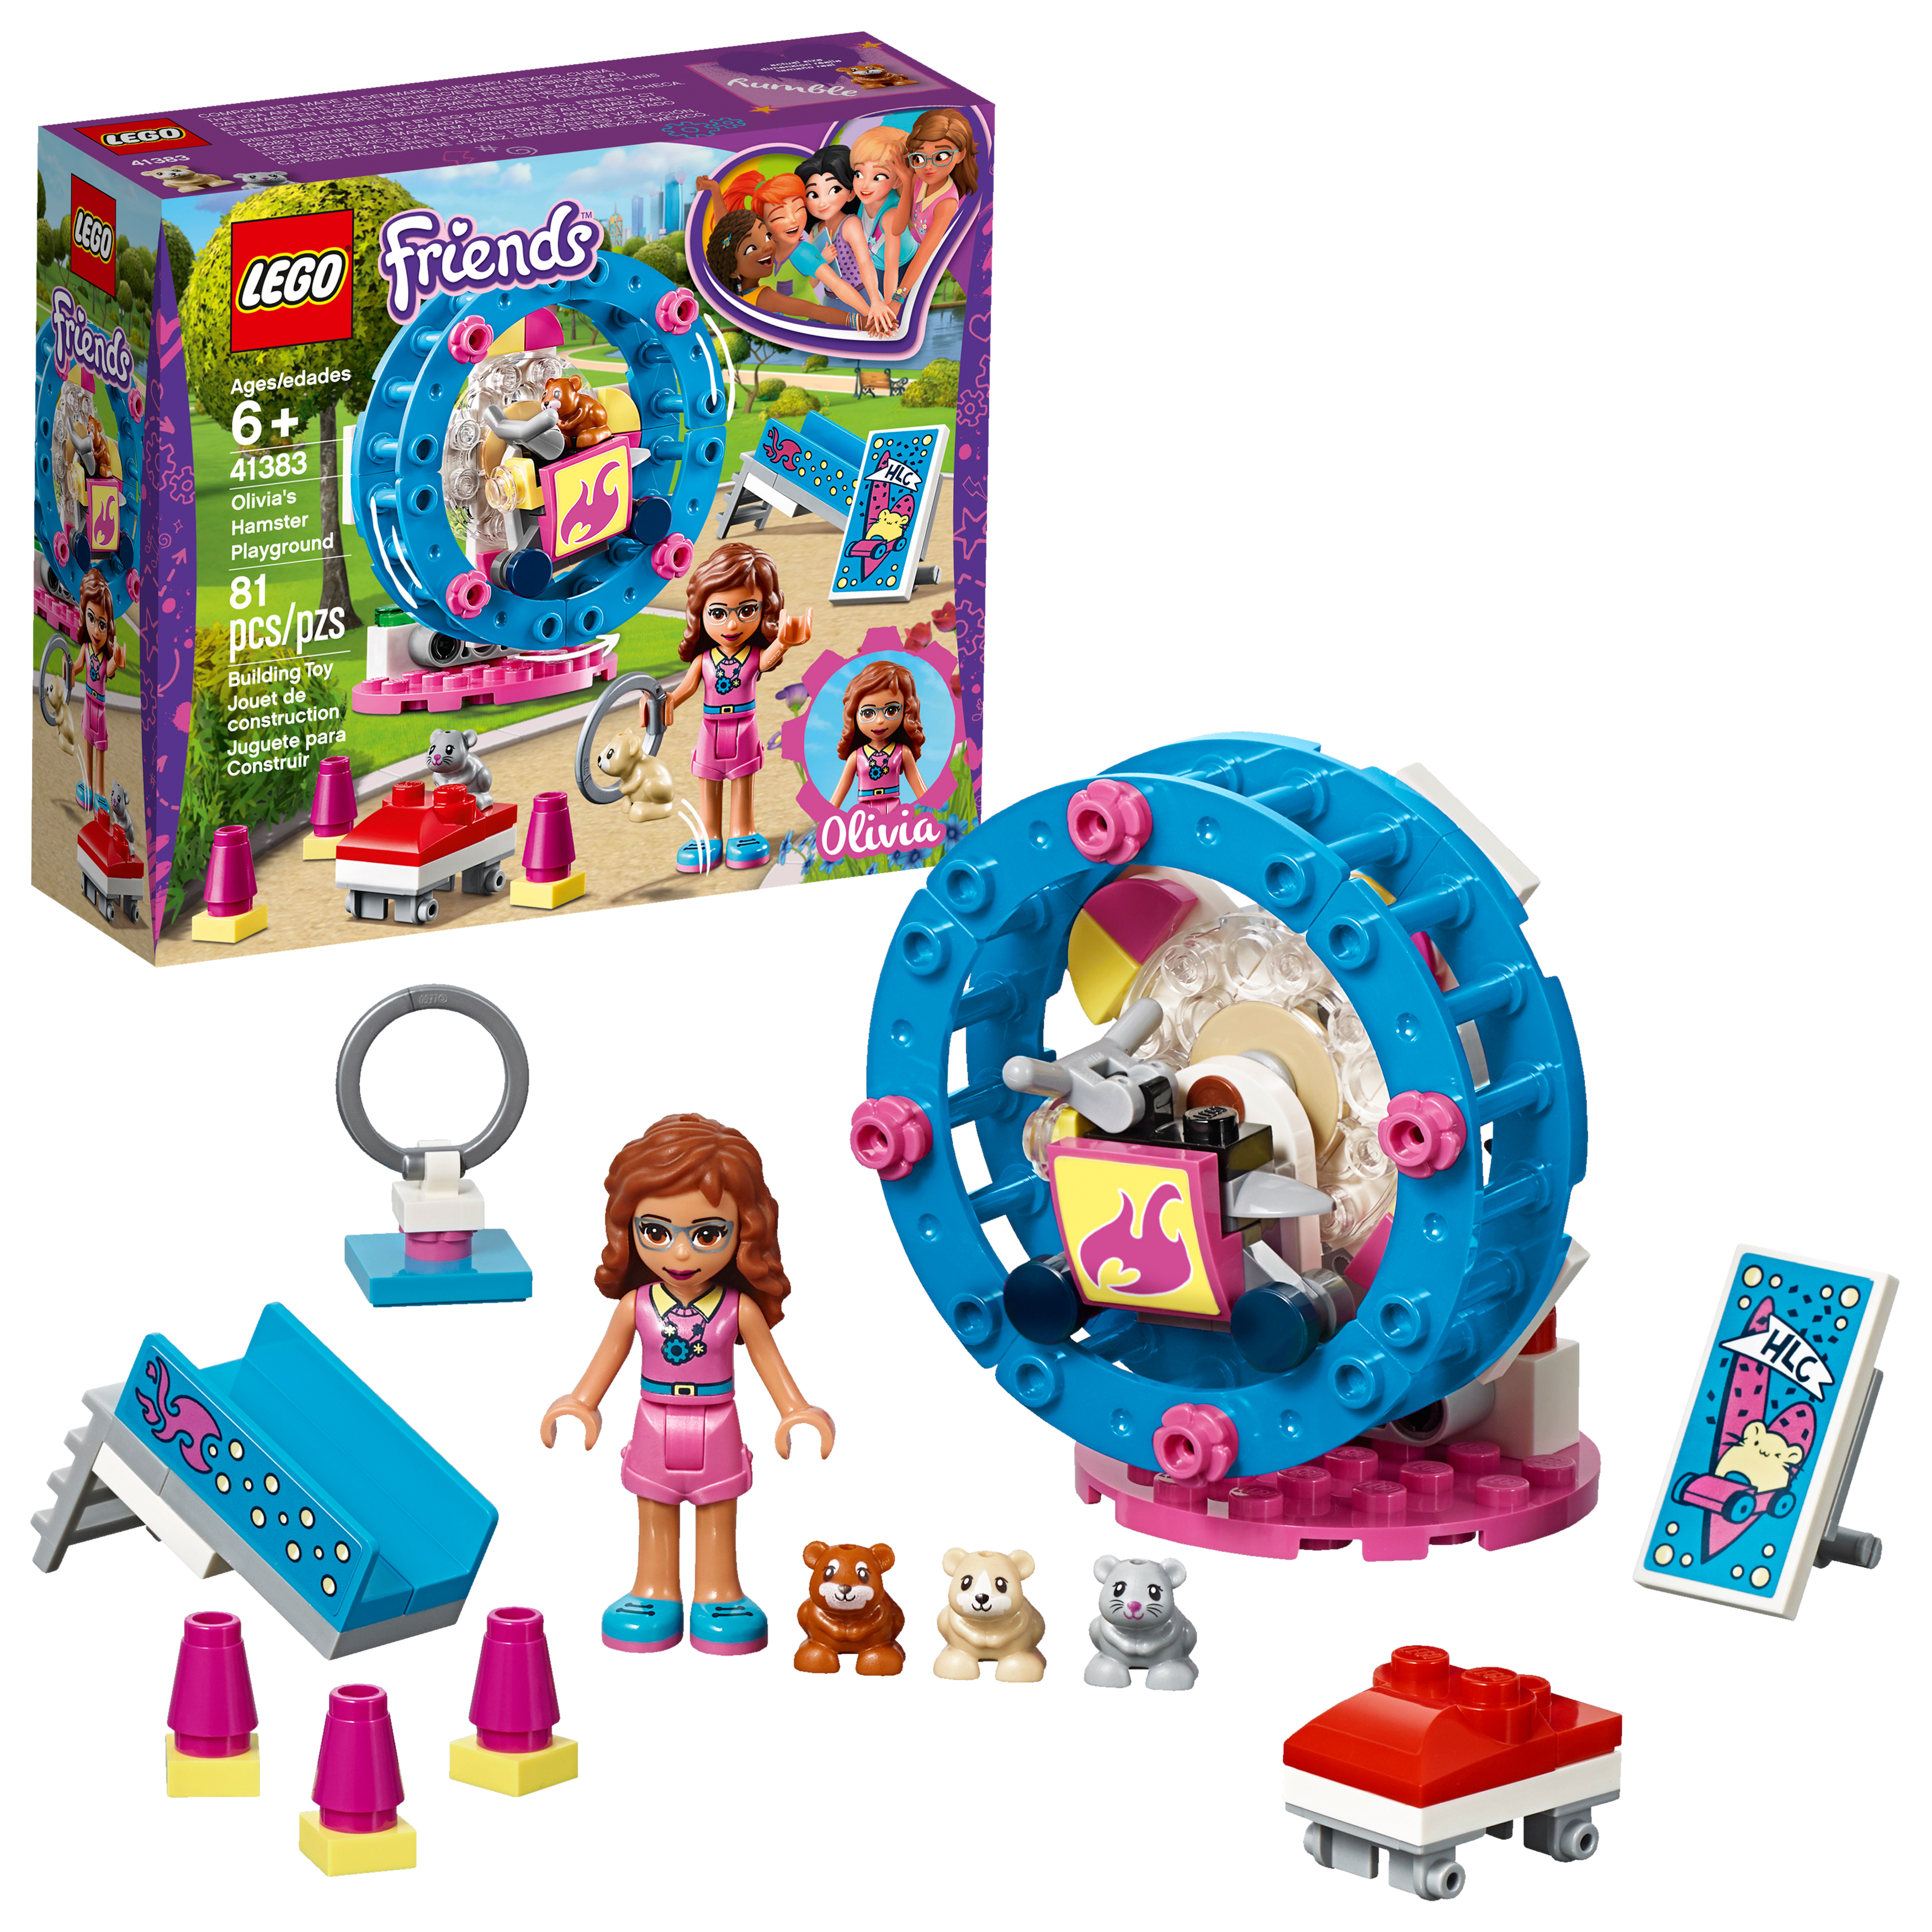 LEGO Friends Olivia's Hamster Playground 41383 9 (81 Pieces) - image 1 of 8